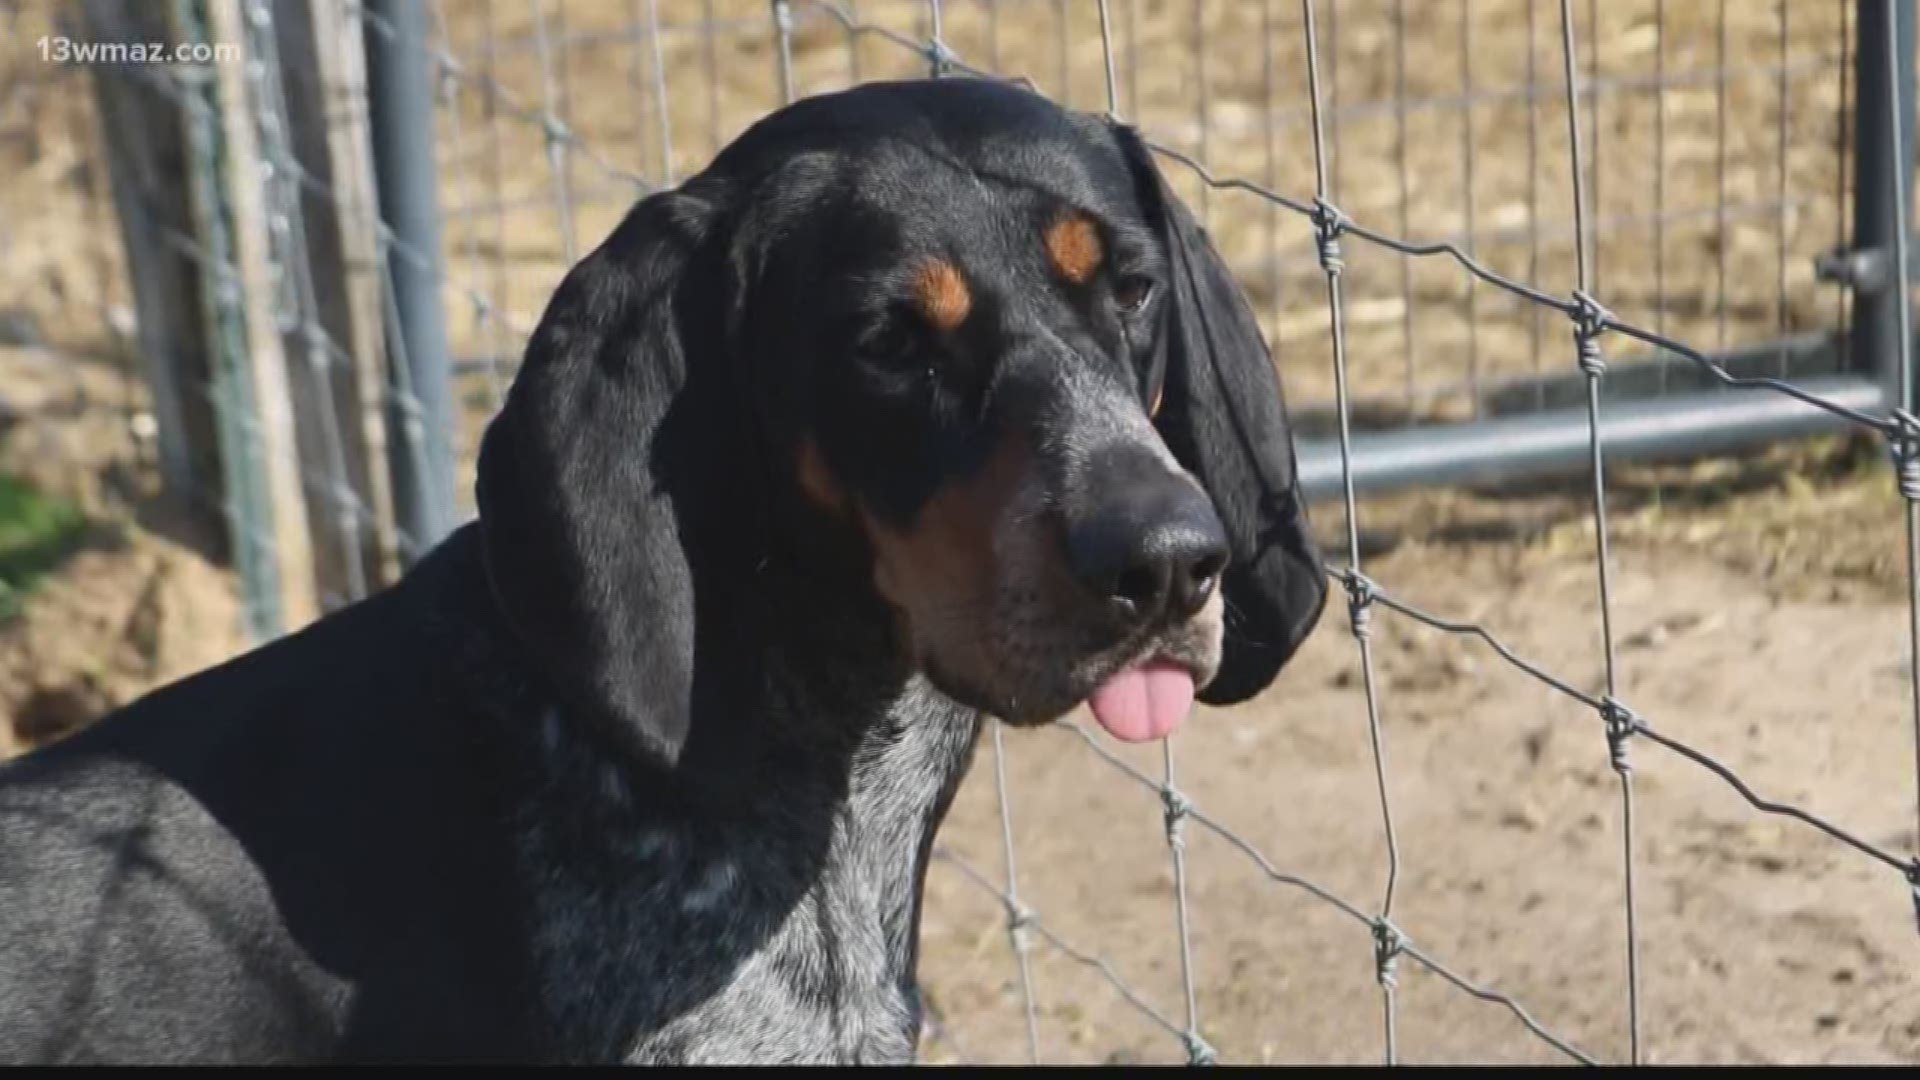 Next month, the Westminster Kennel Club Dog Show will kick off in New York City. Meet a Crawford County hound who has her eyes on the prize.